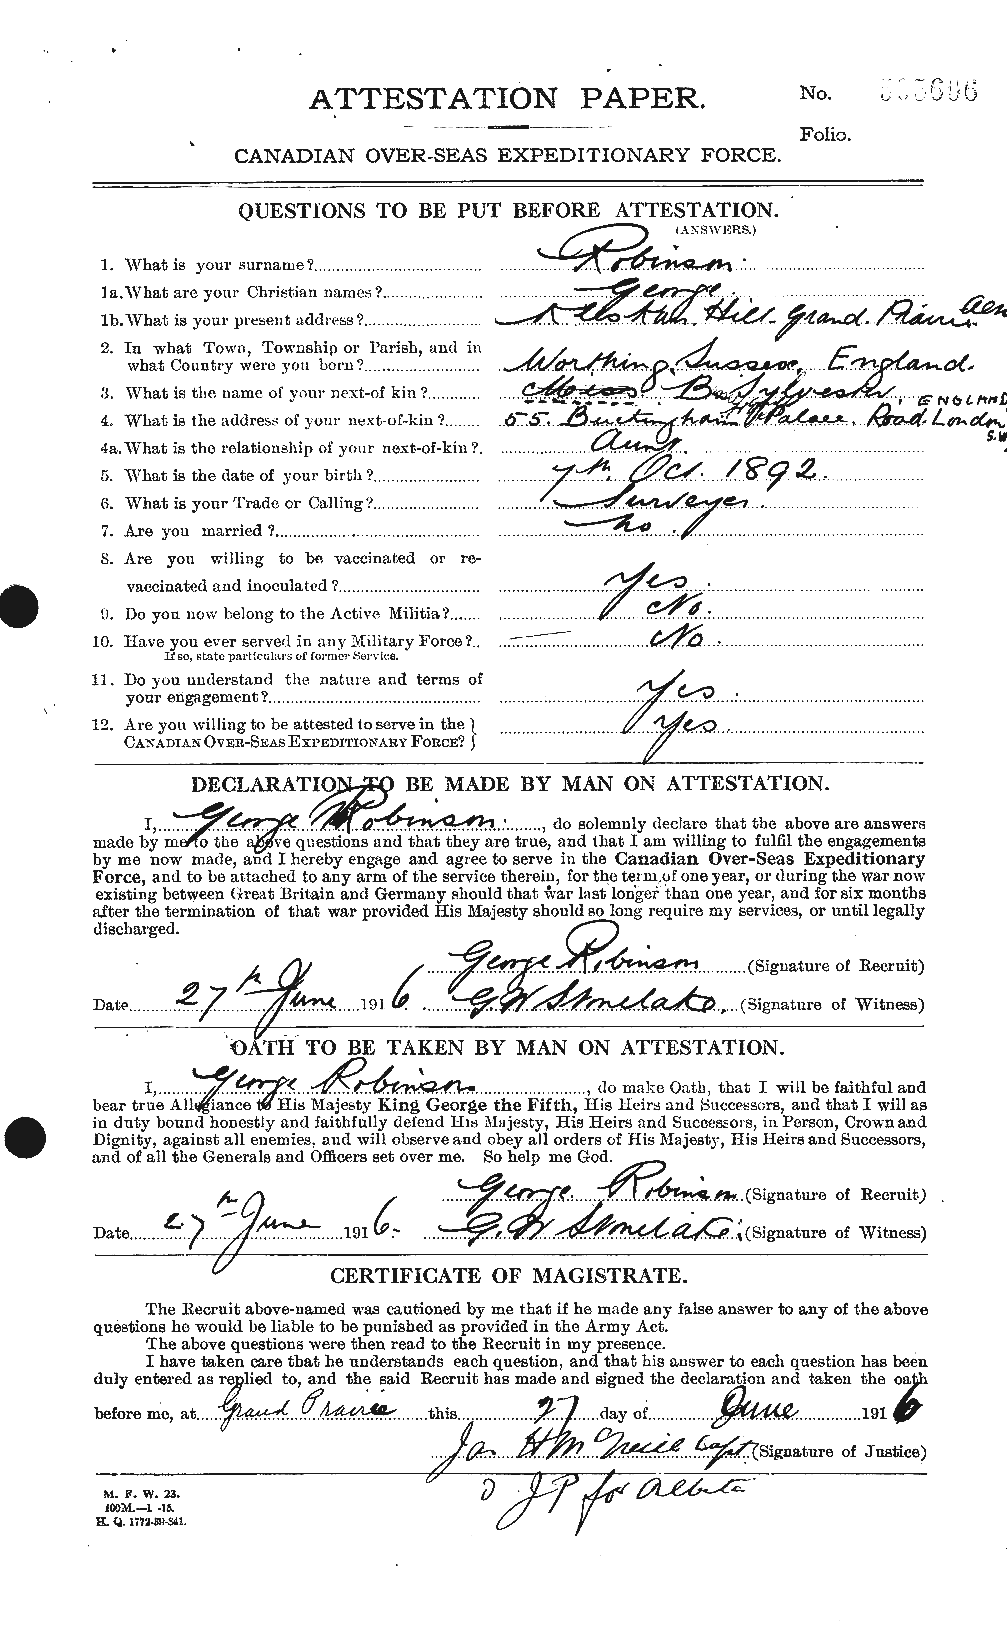 Personnel Records of the First World War - CEF 607354a